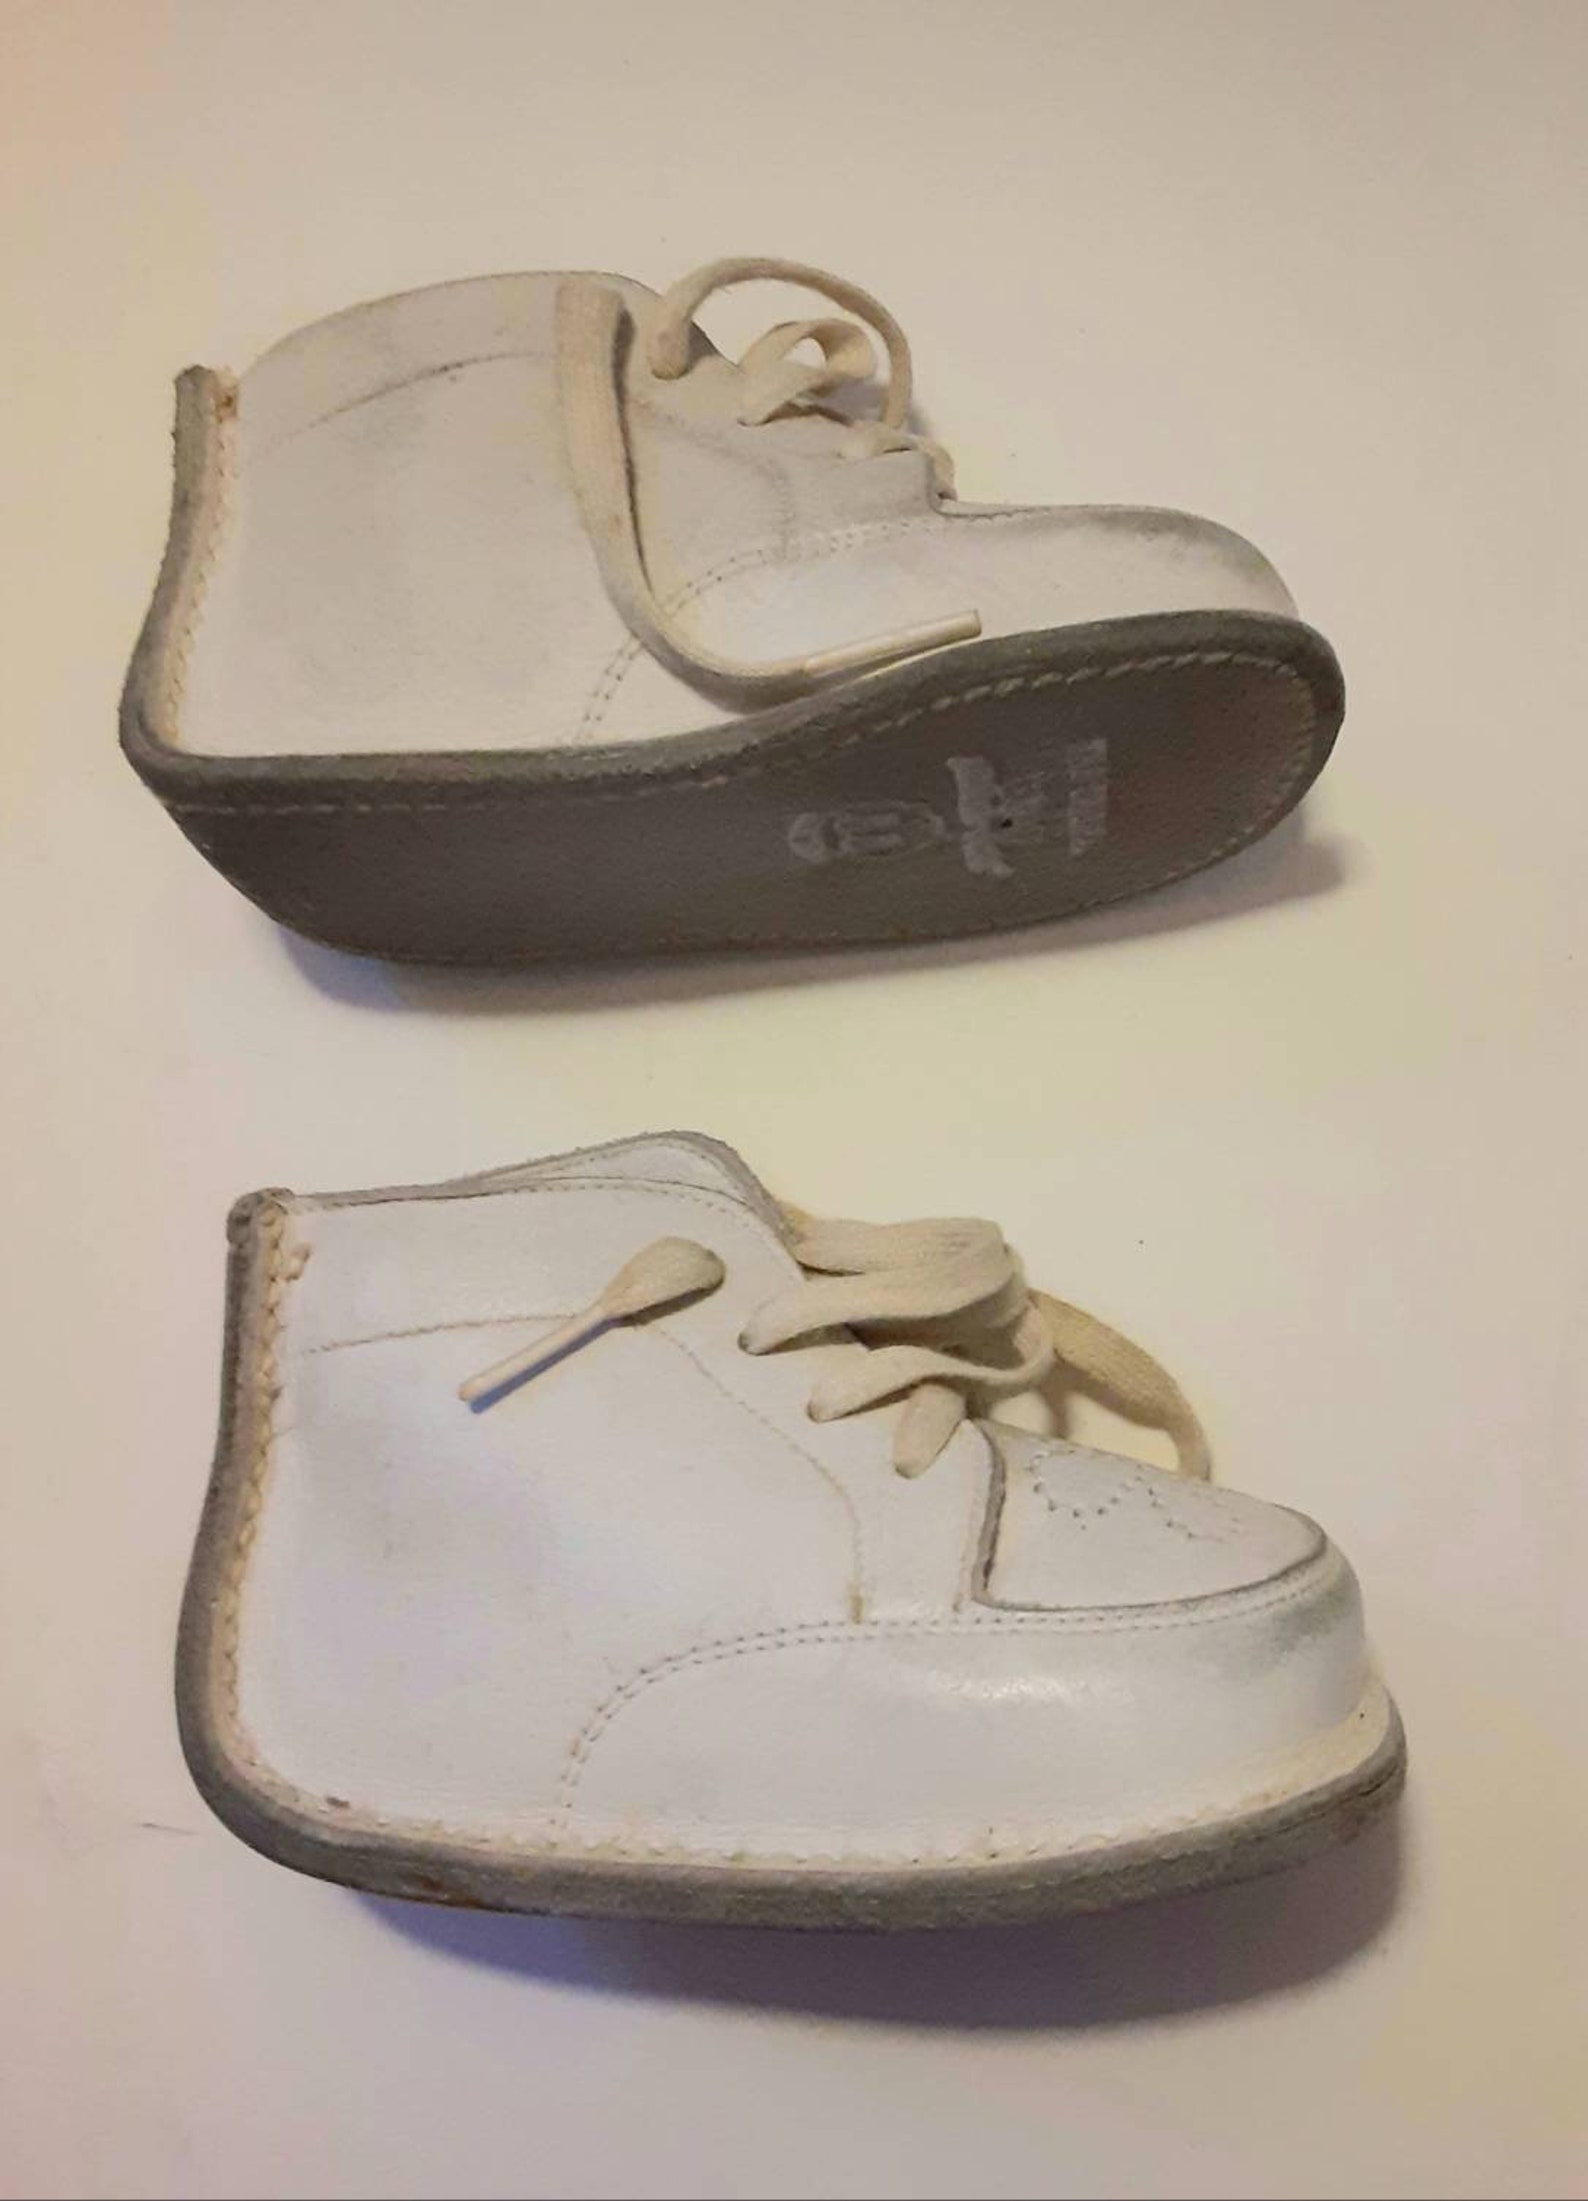 Vintage Baby Jumping Jacks Leather Baby Shoes | Etsy